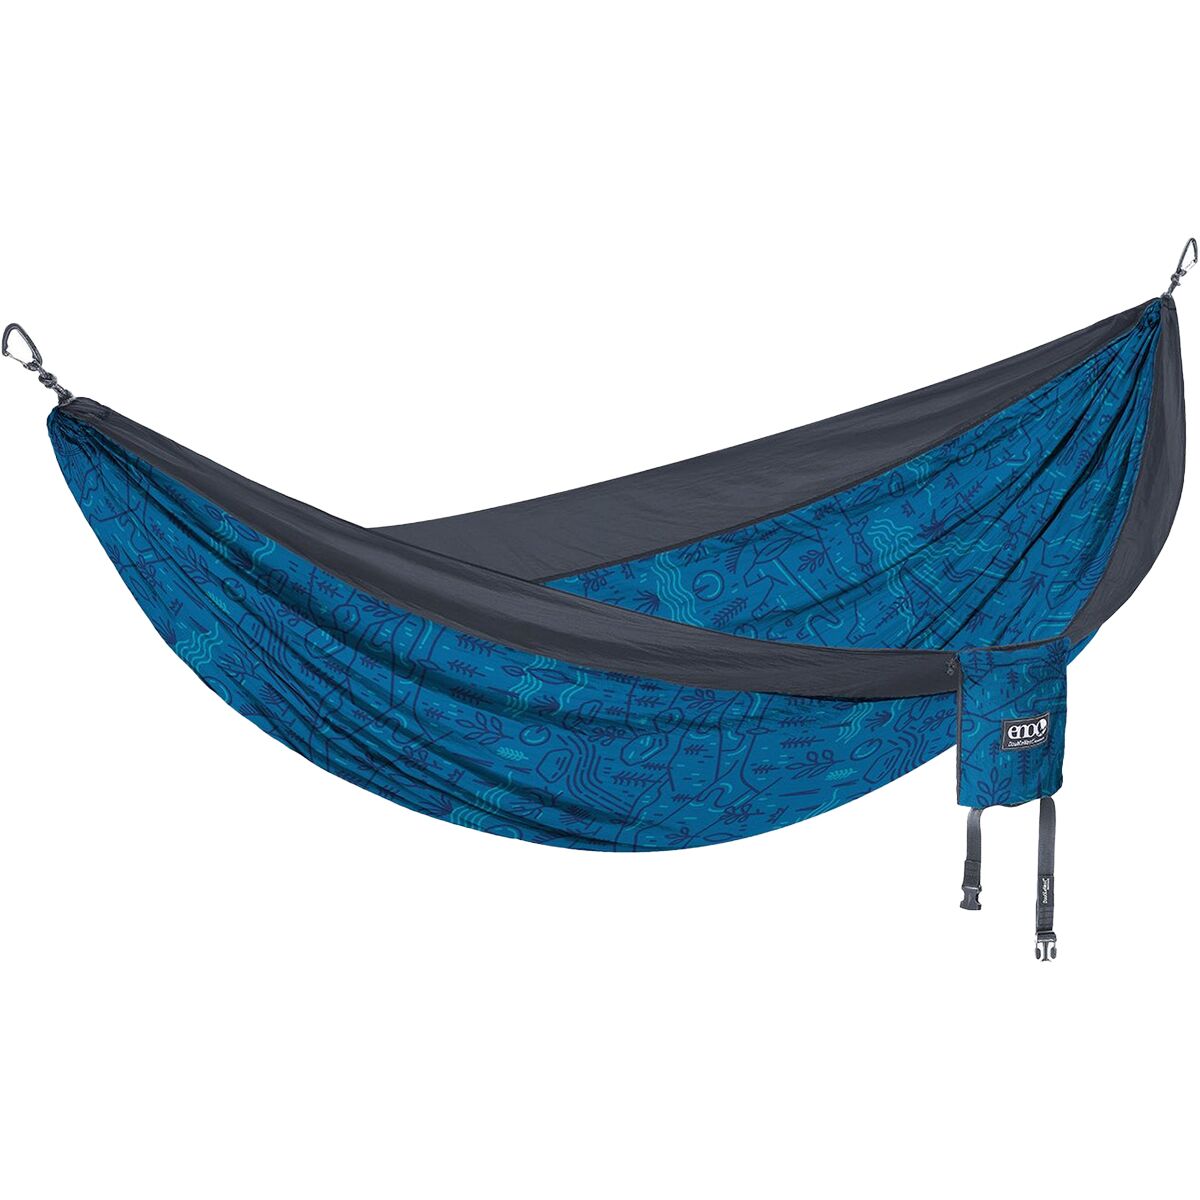 Eagles Nest Outfitters DoubleNest Giving Back Print Hammock